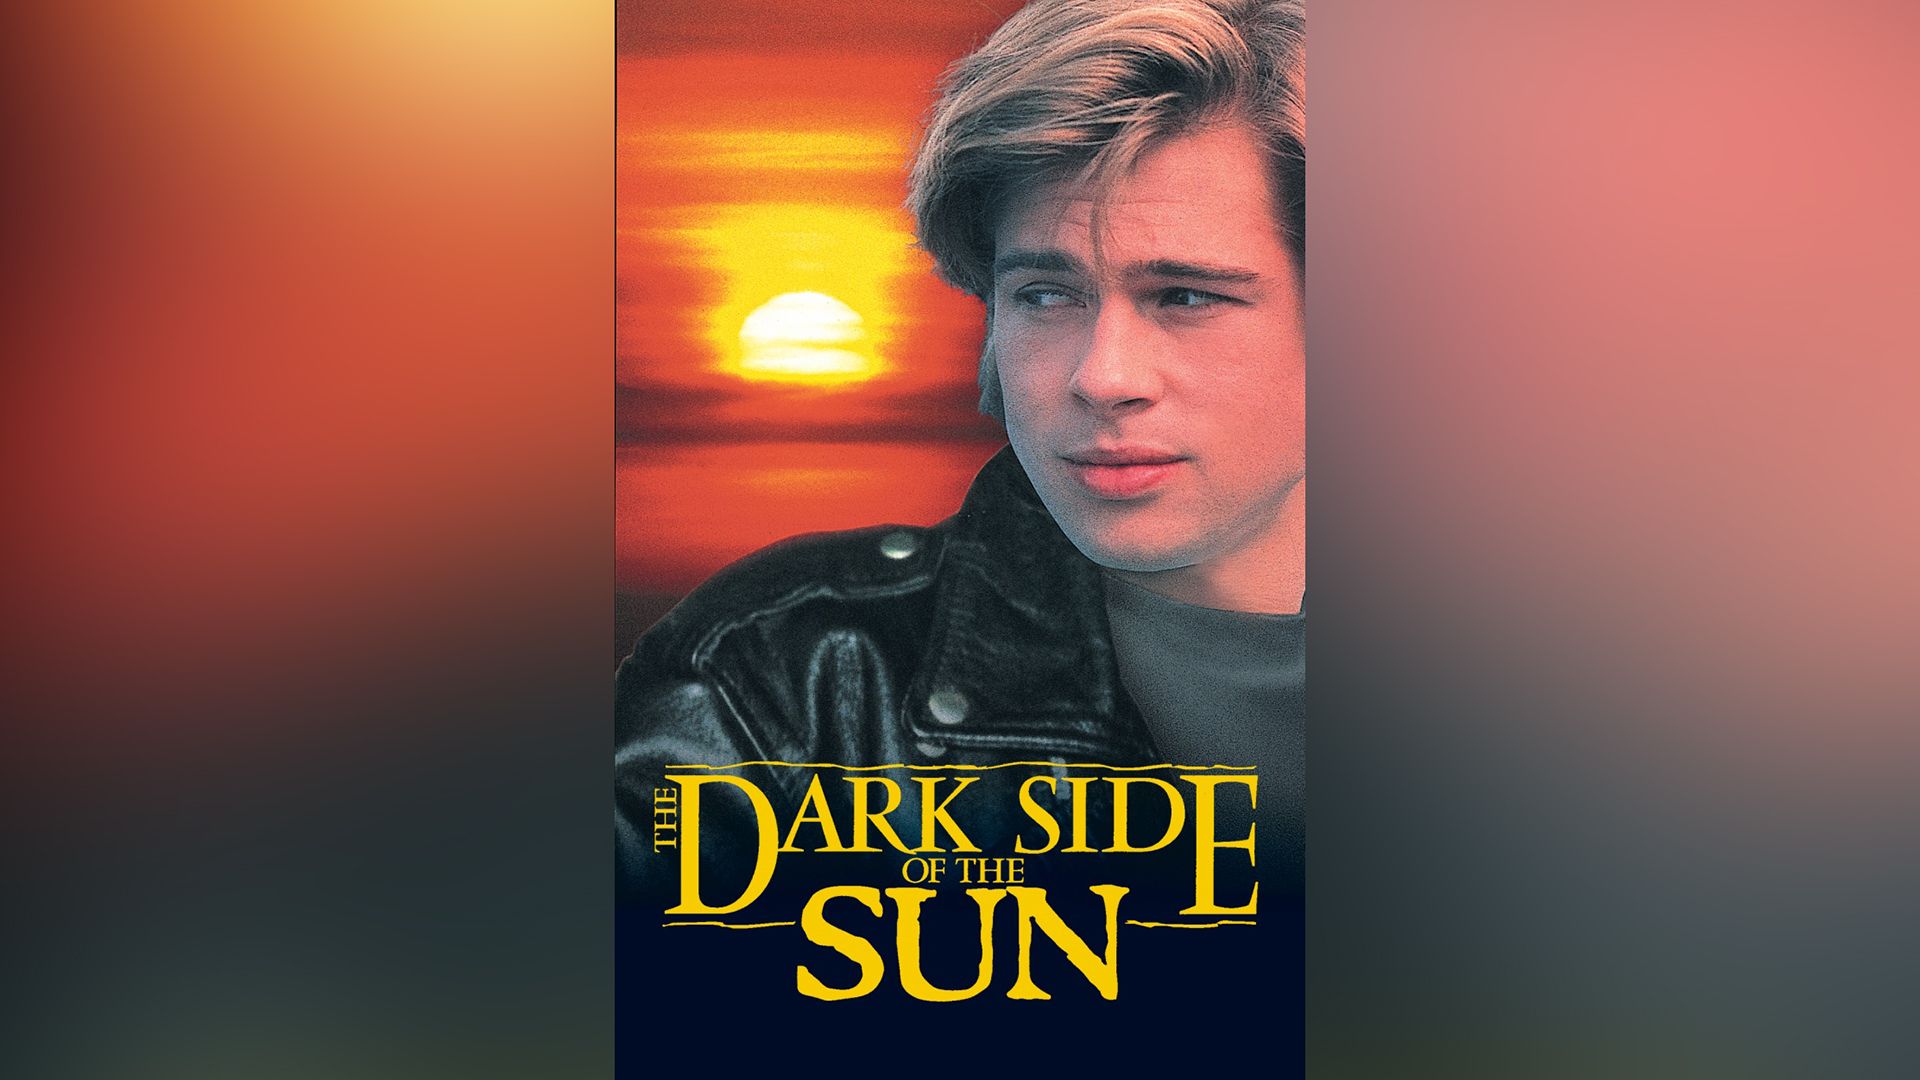 The first full-length film featuring Brad Pitt, “The Dark Side of the Sun”